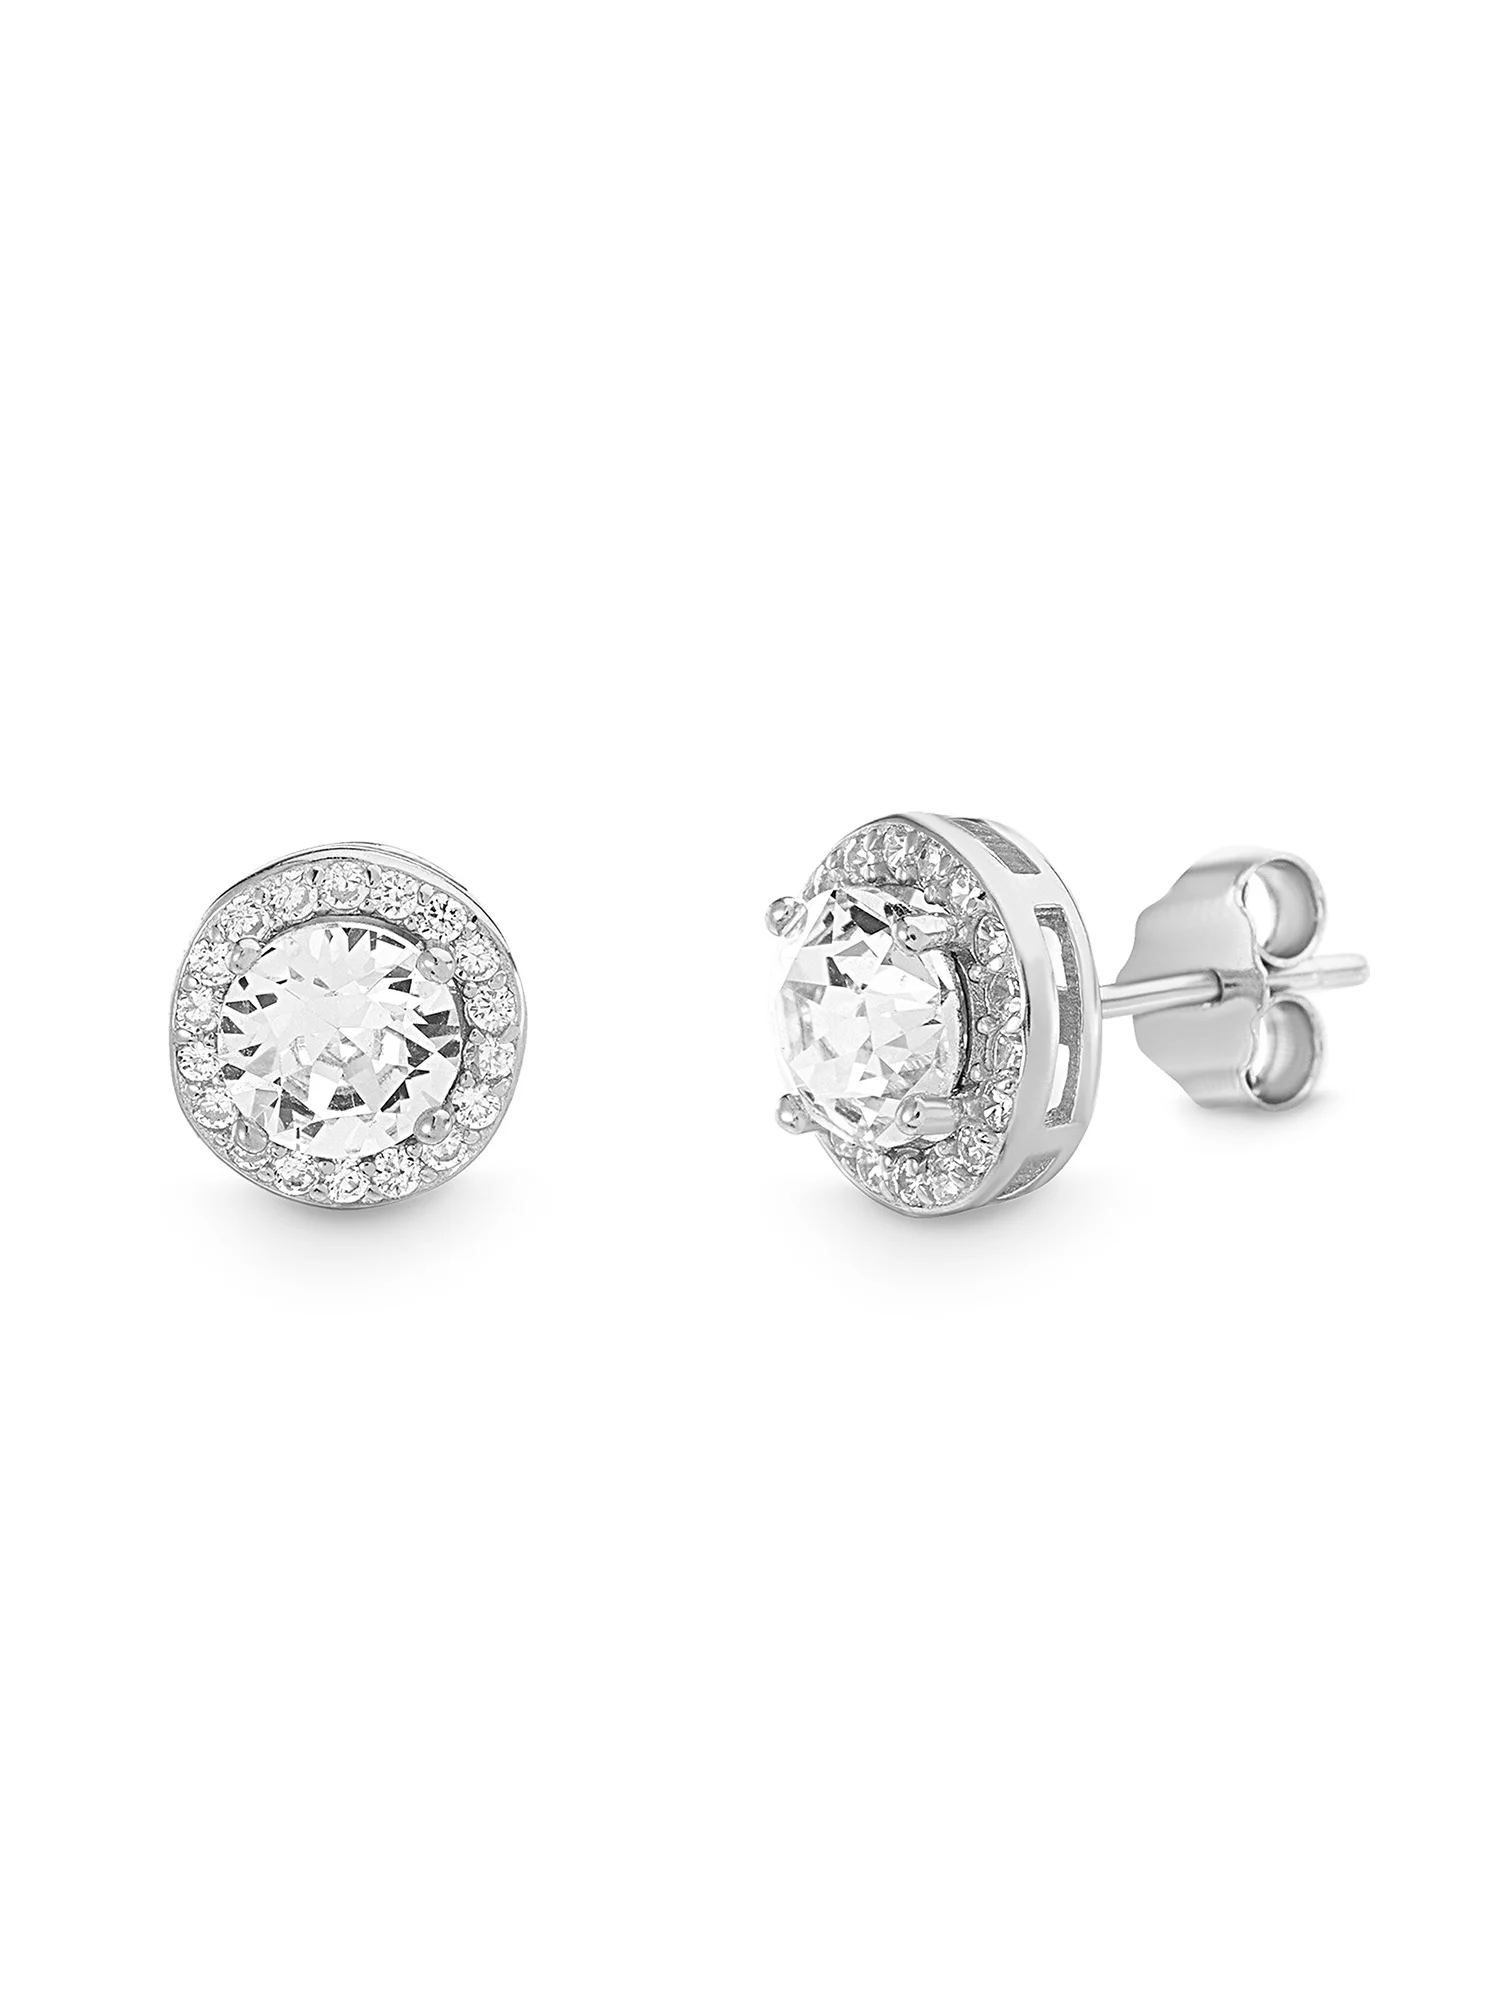 Lesa Michele Faceted Crystal Round Halo Earring in Sterling Silver made with Cubic Zirconia Crystals